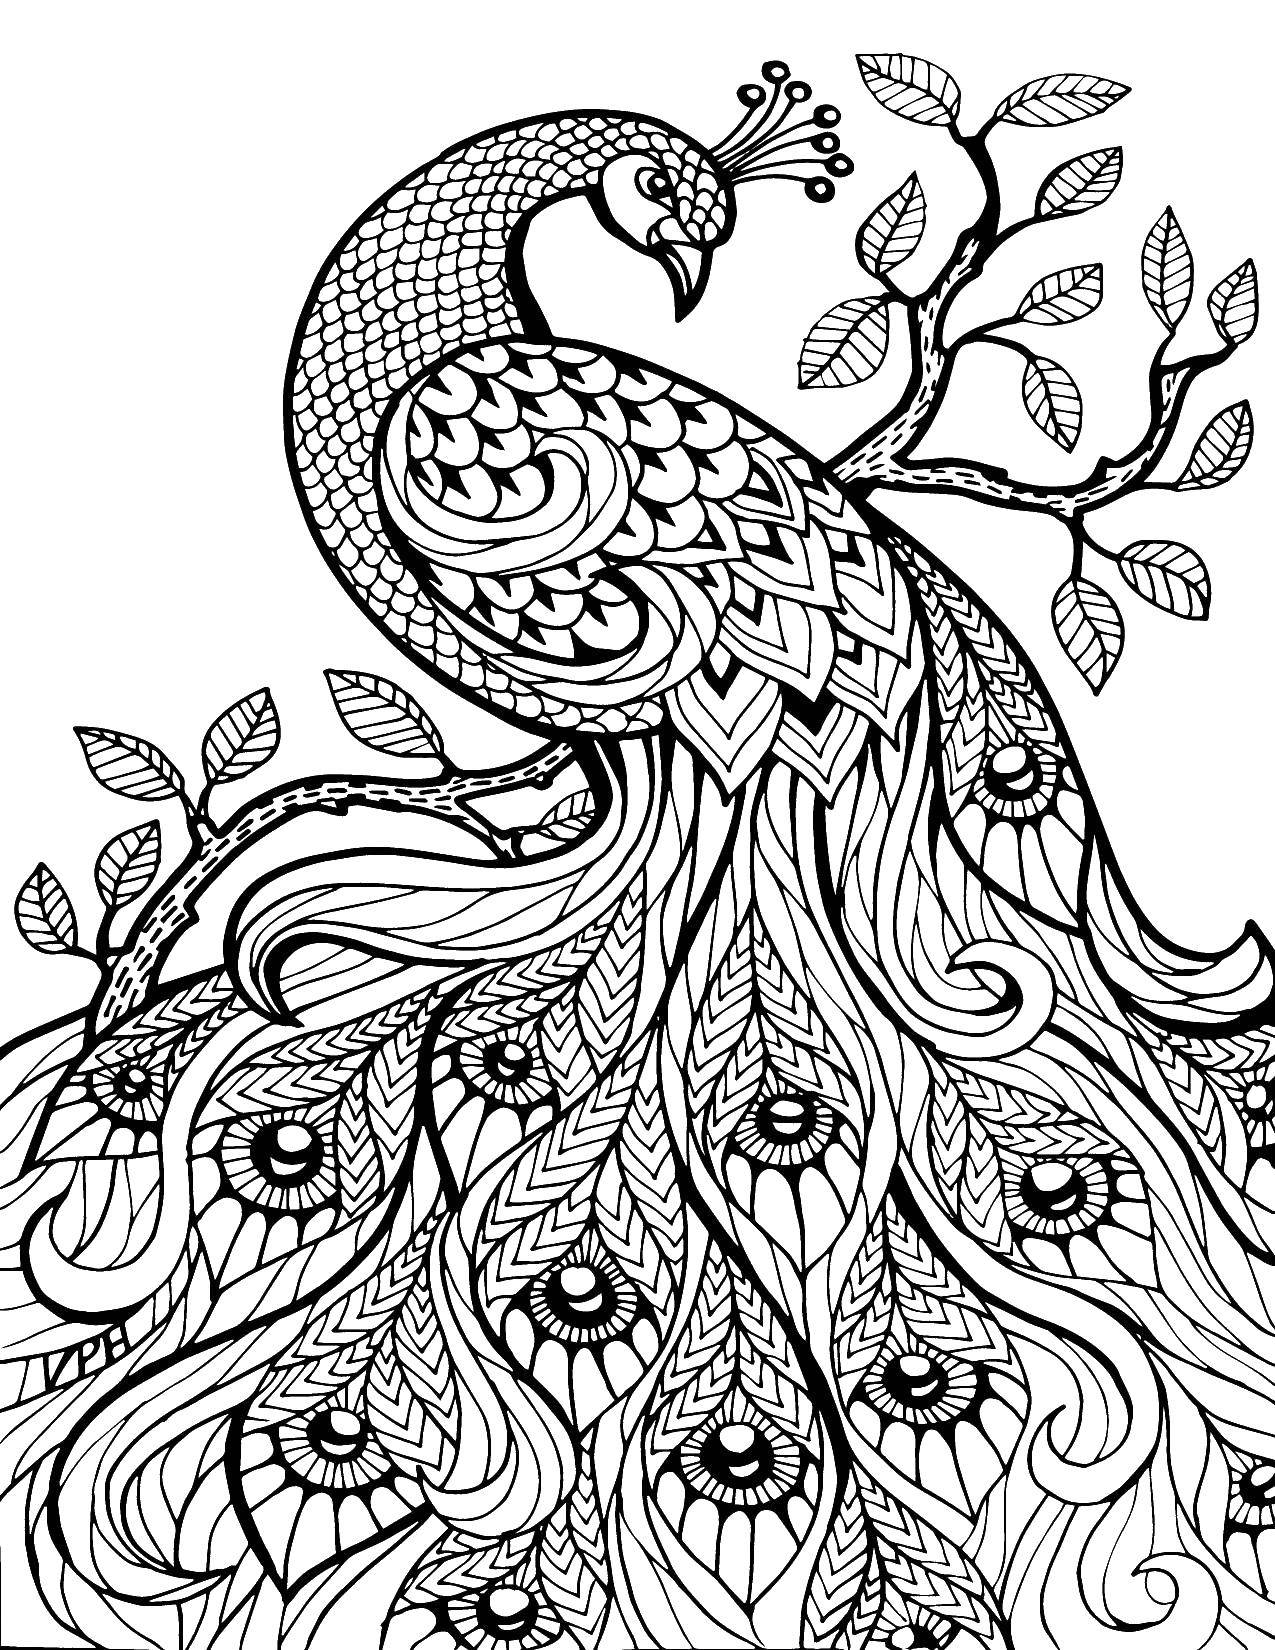 Coloring Fabulous peacock patterns. Category birds. Tags:  Birds, peacock.